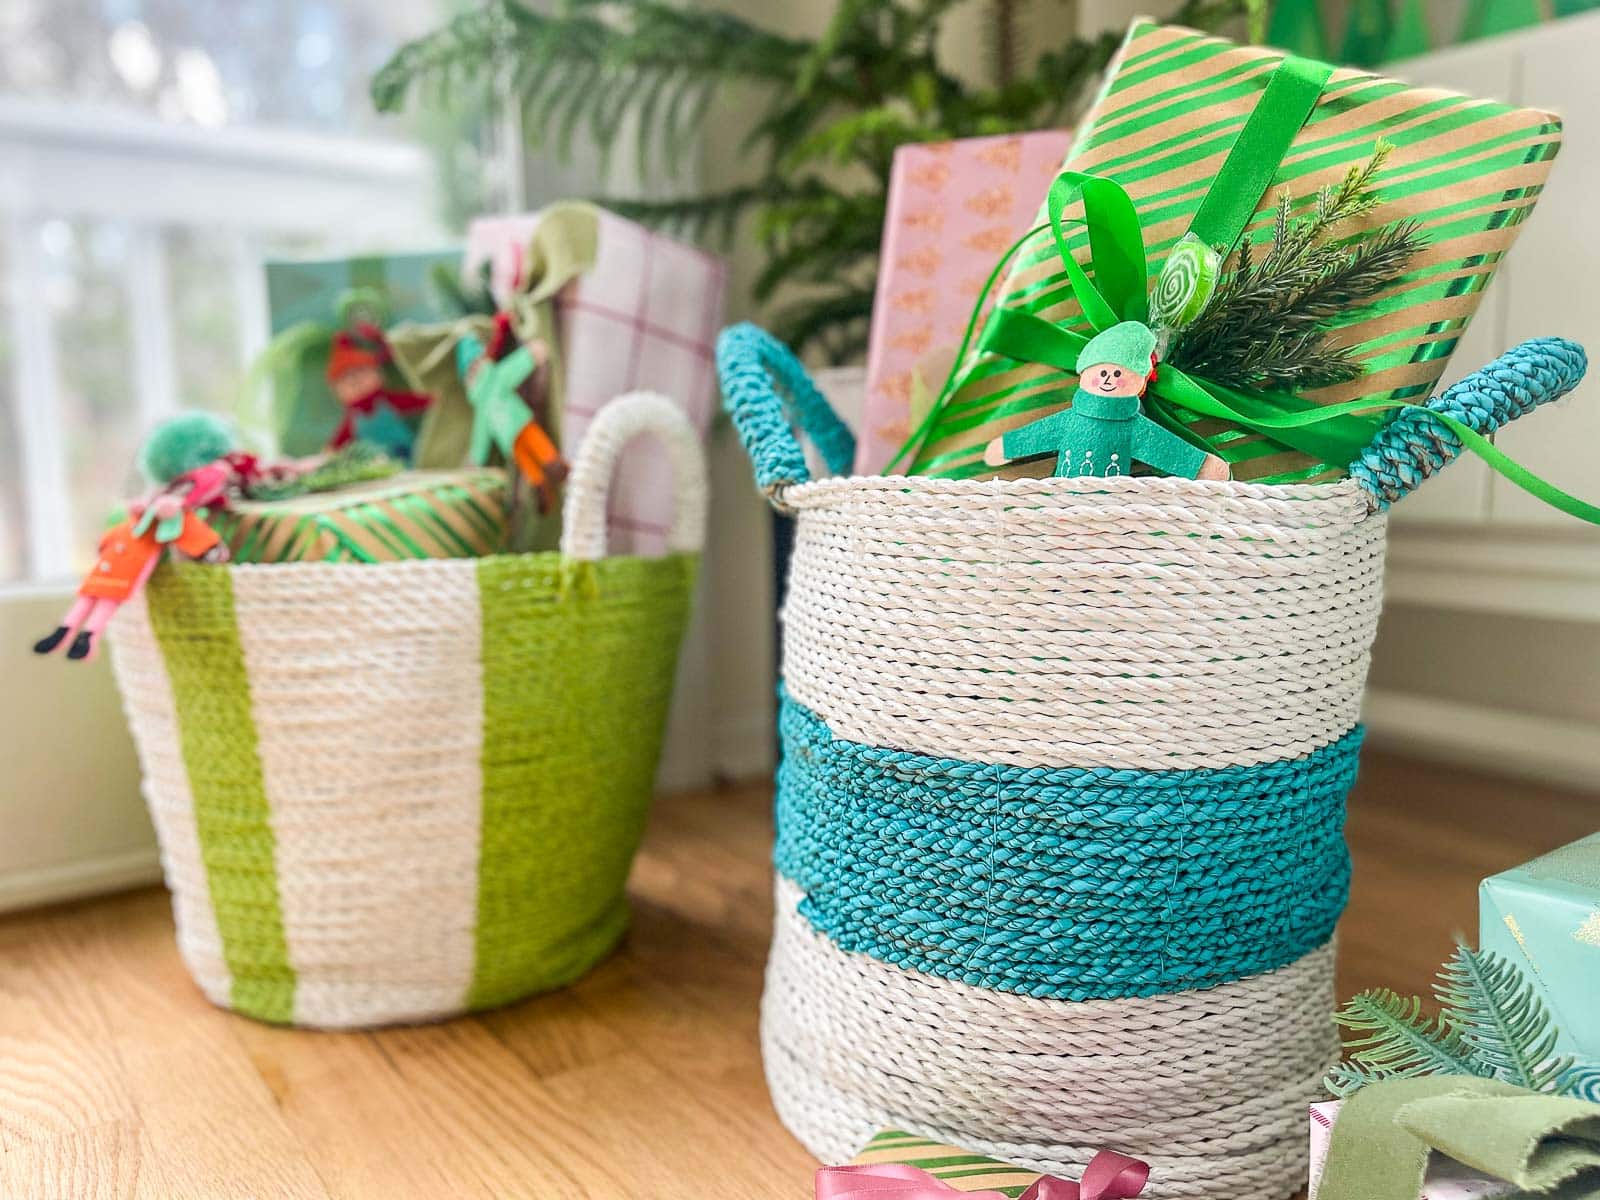 spray painted striped baskets